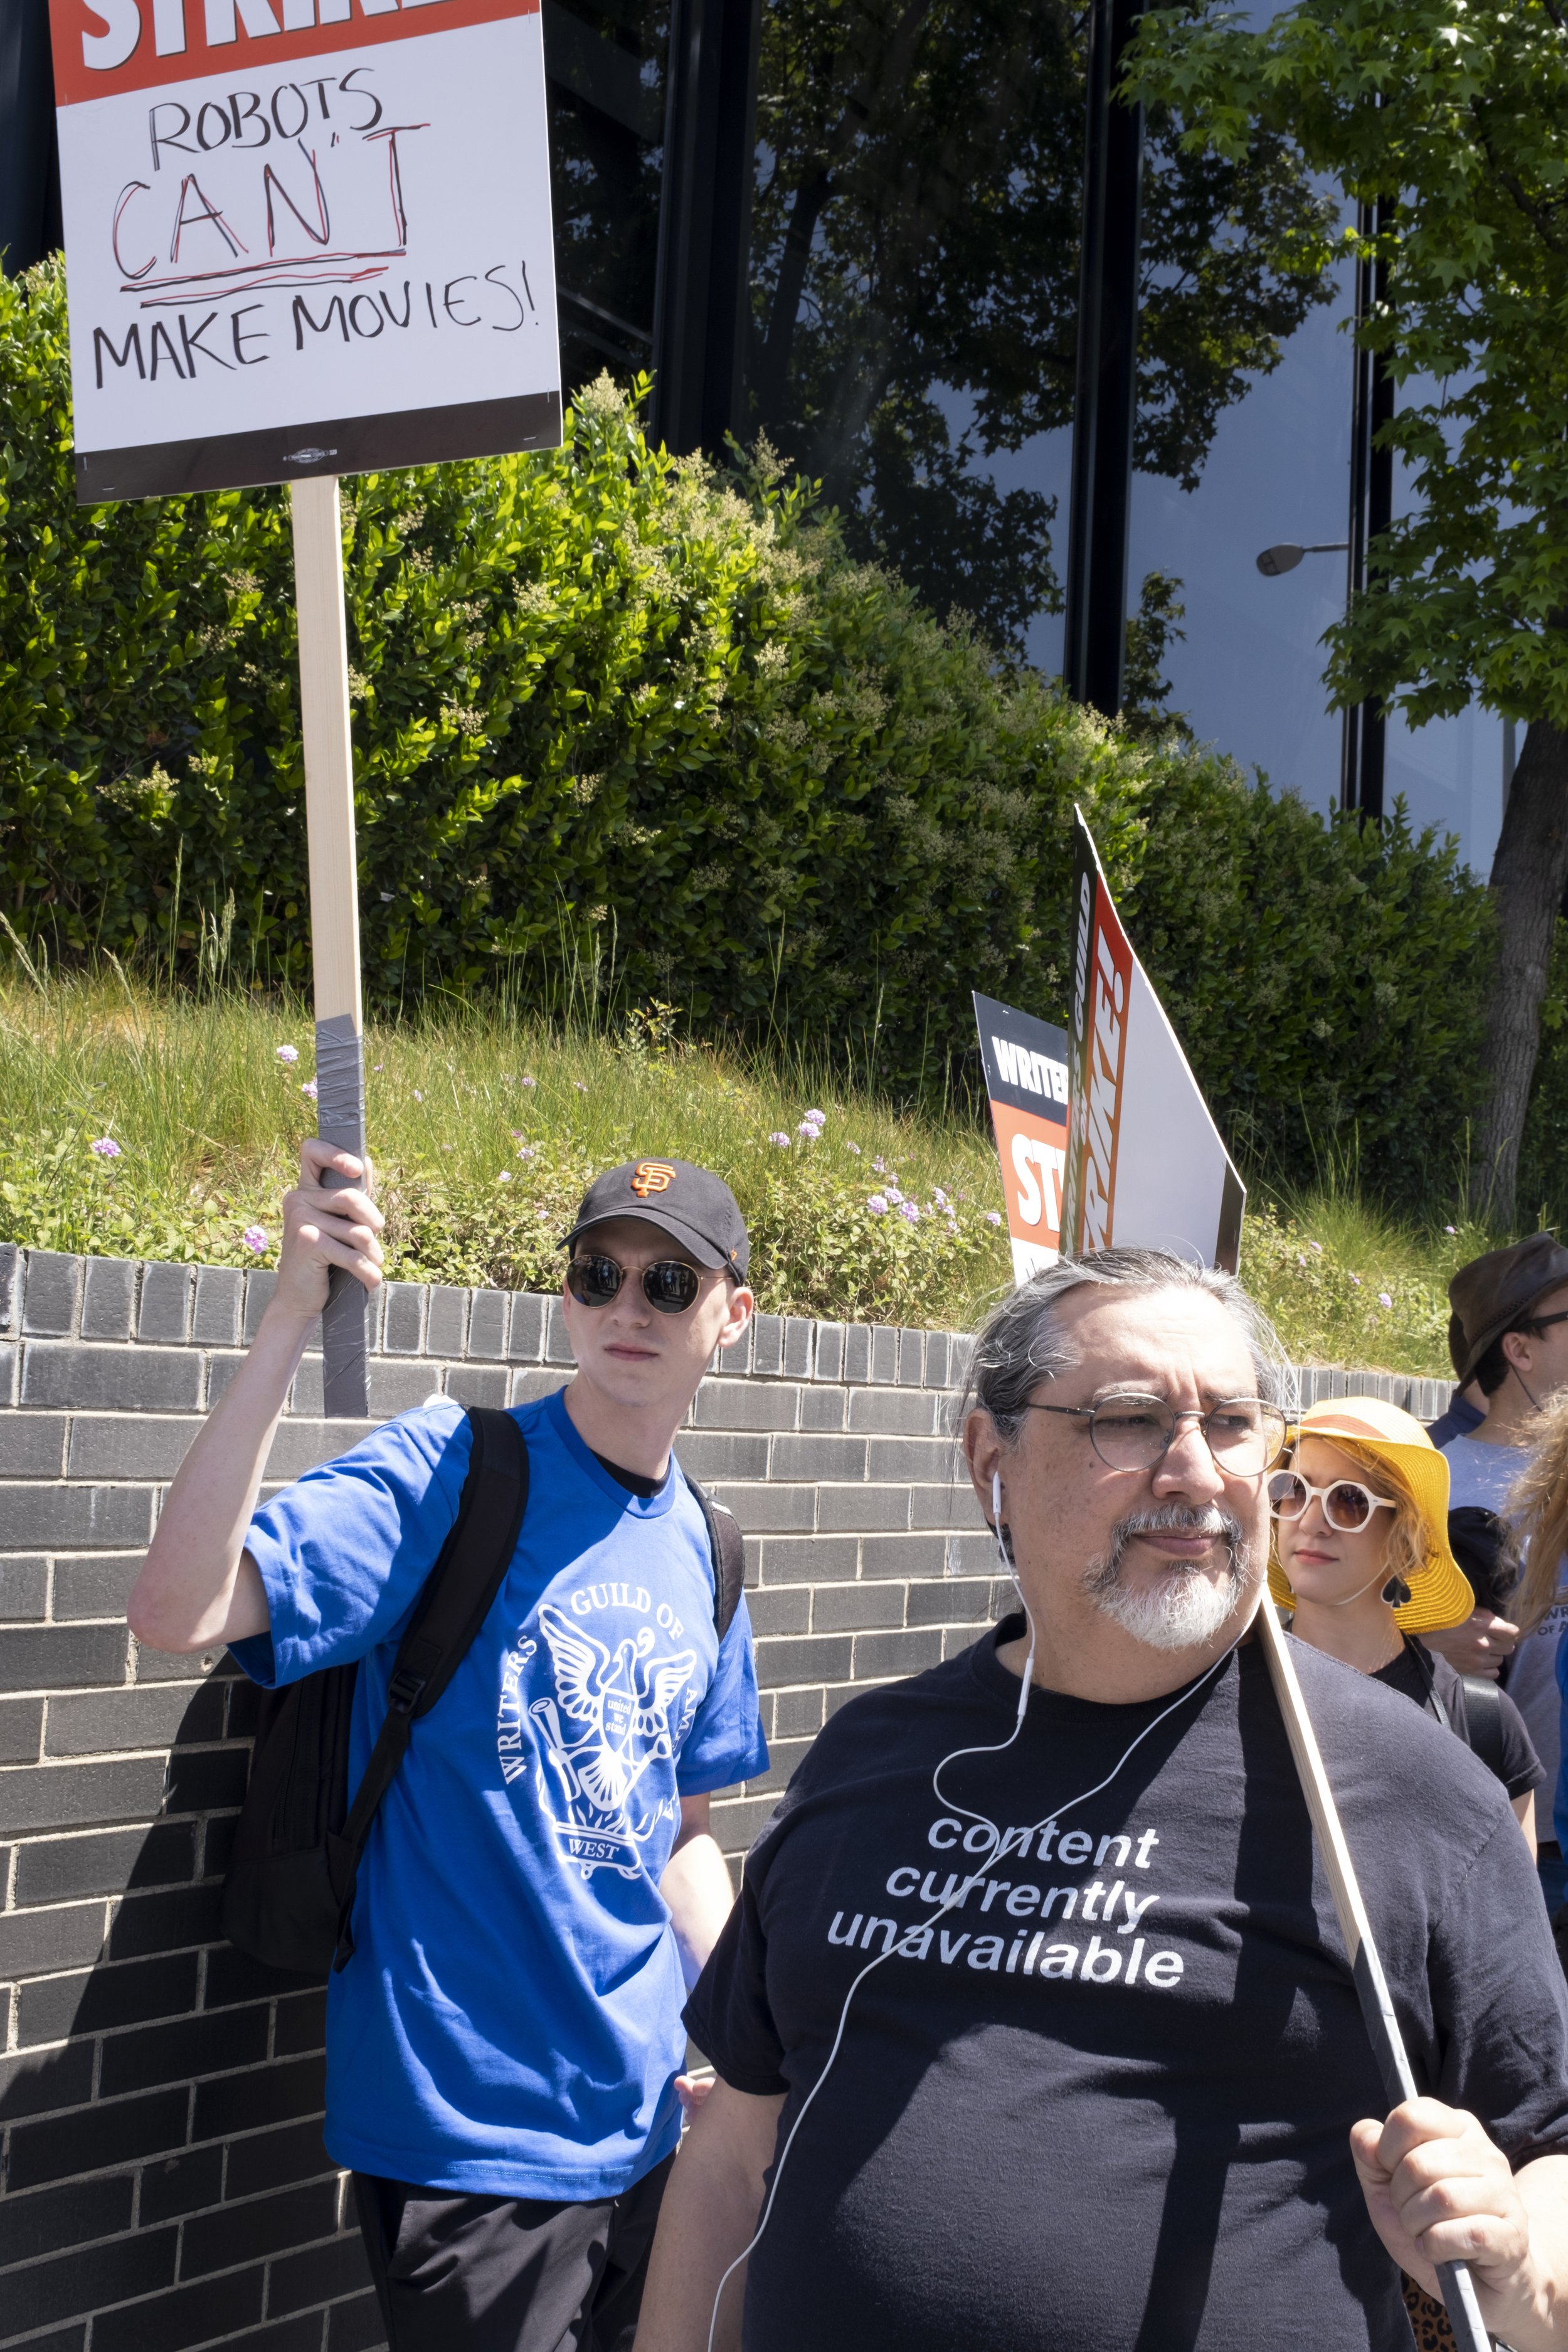  Writers Guild of America member Joey Koenig (left) pickets in front of Universal Studios in Studio City, Calif. on Tuesday, May 2 following disagreements within negotiations between the Alliance of Motion Pictures and Television Producers. (Anna Sop